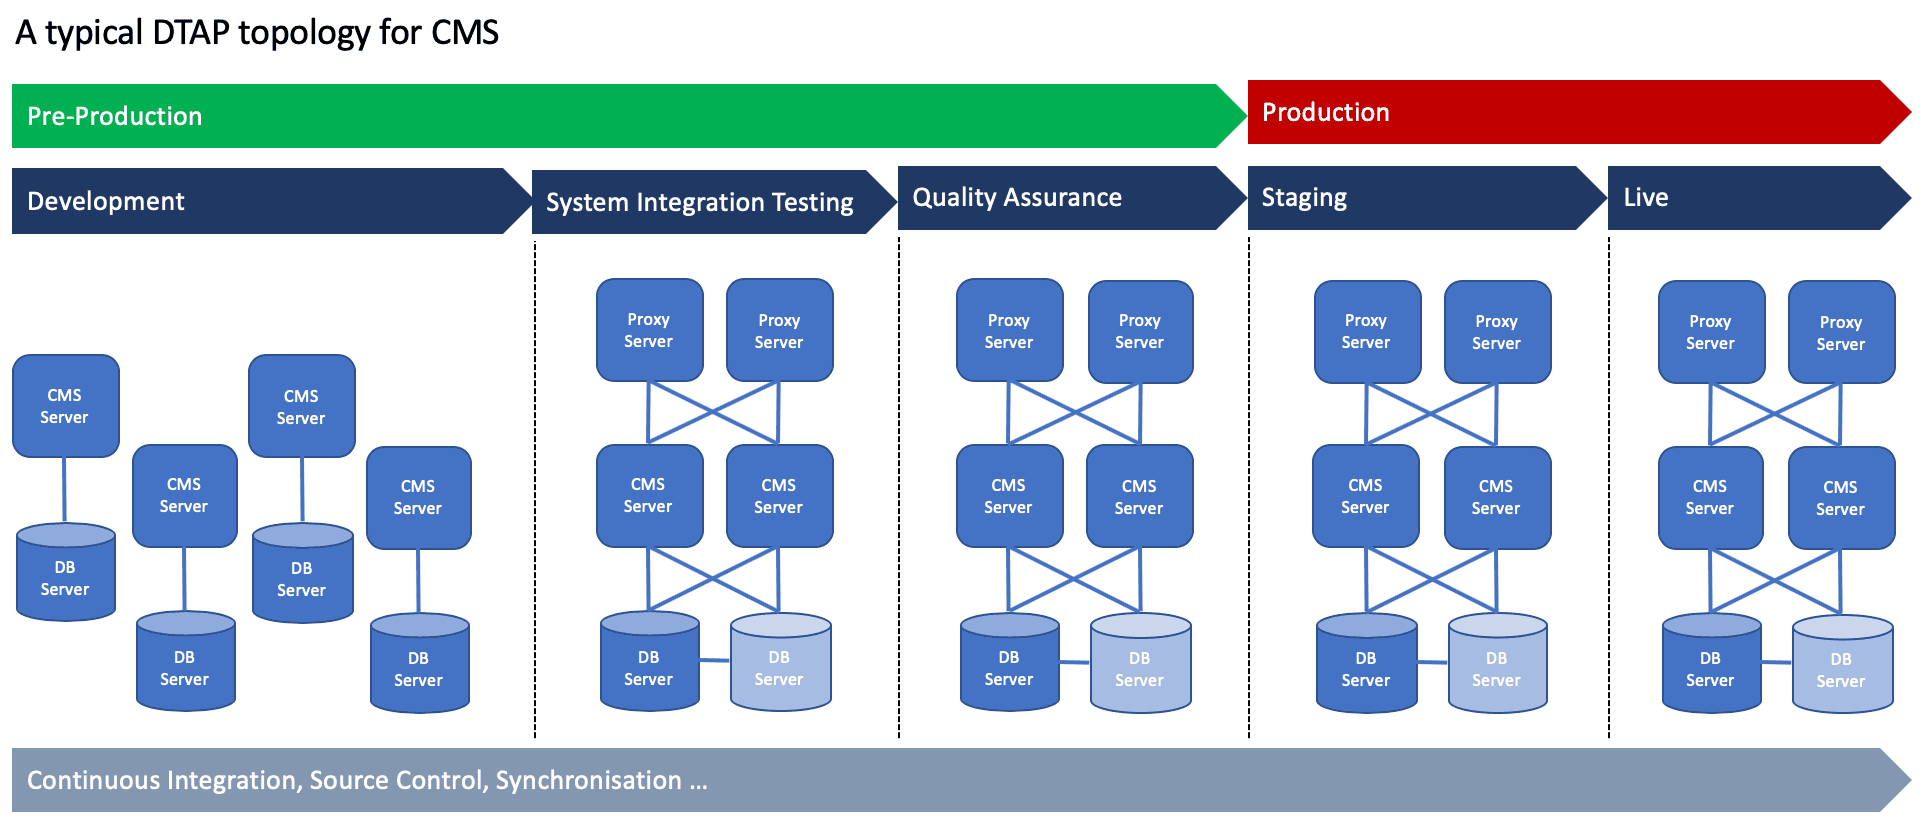 A traditional DTAP approach for CMS - Diagram